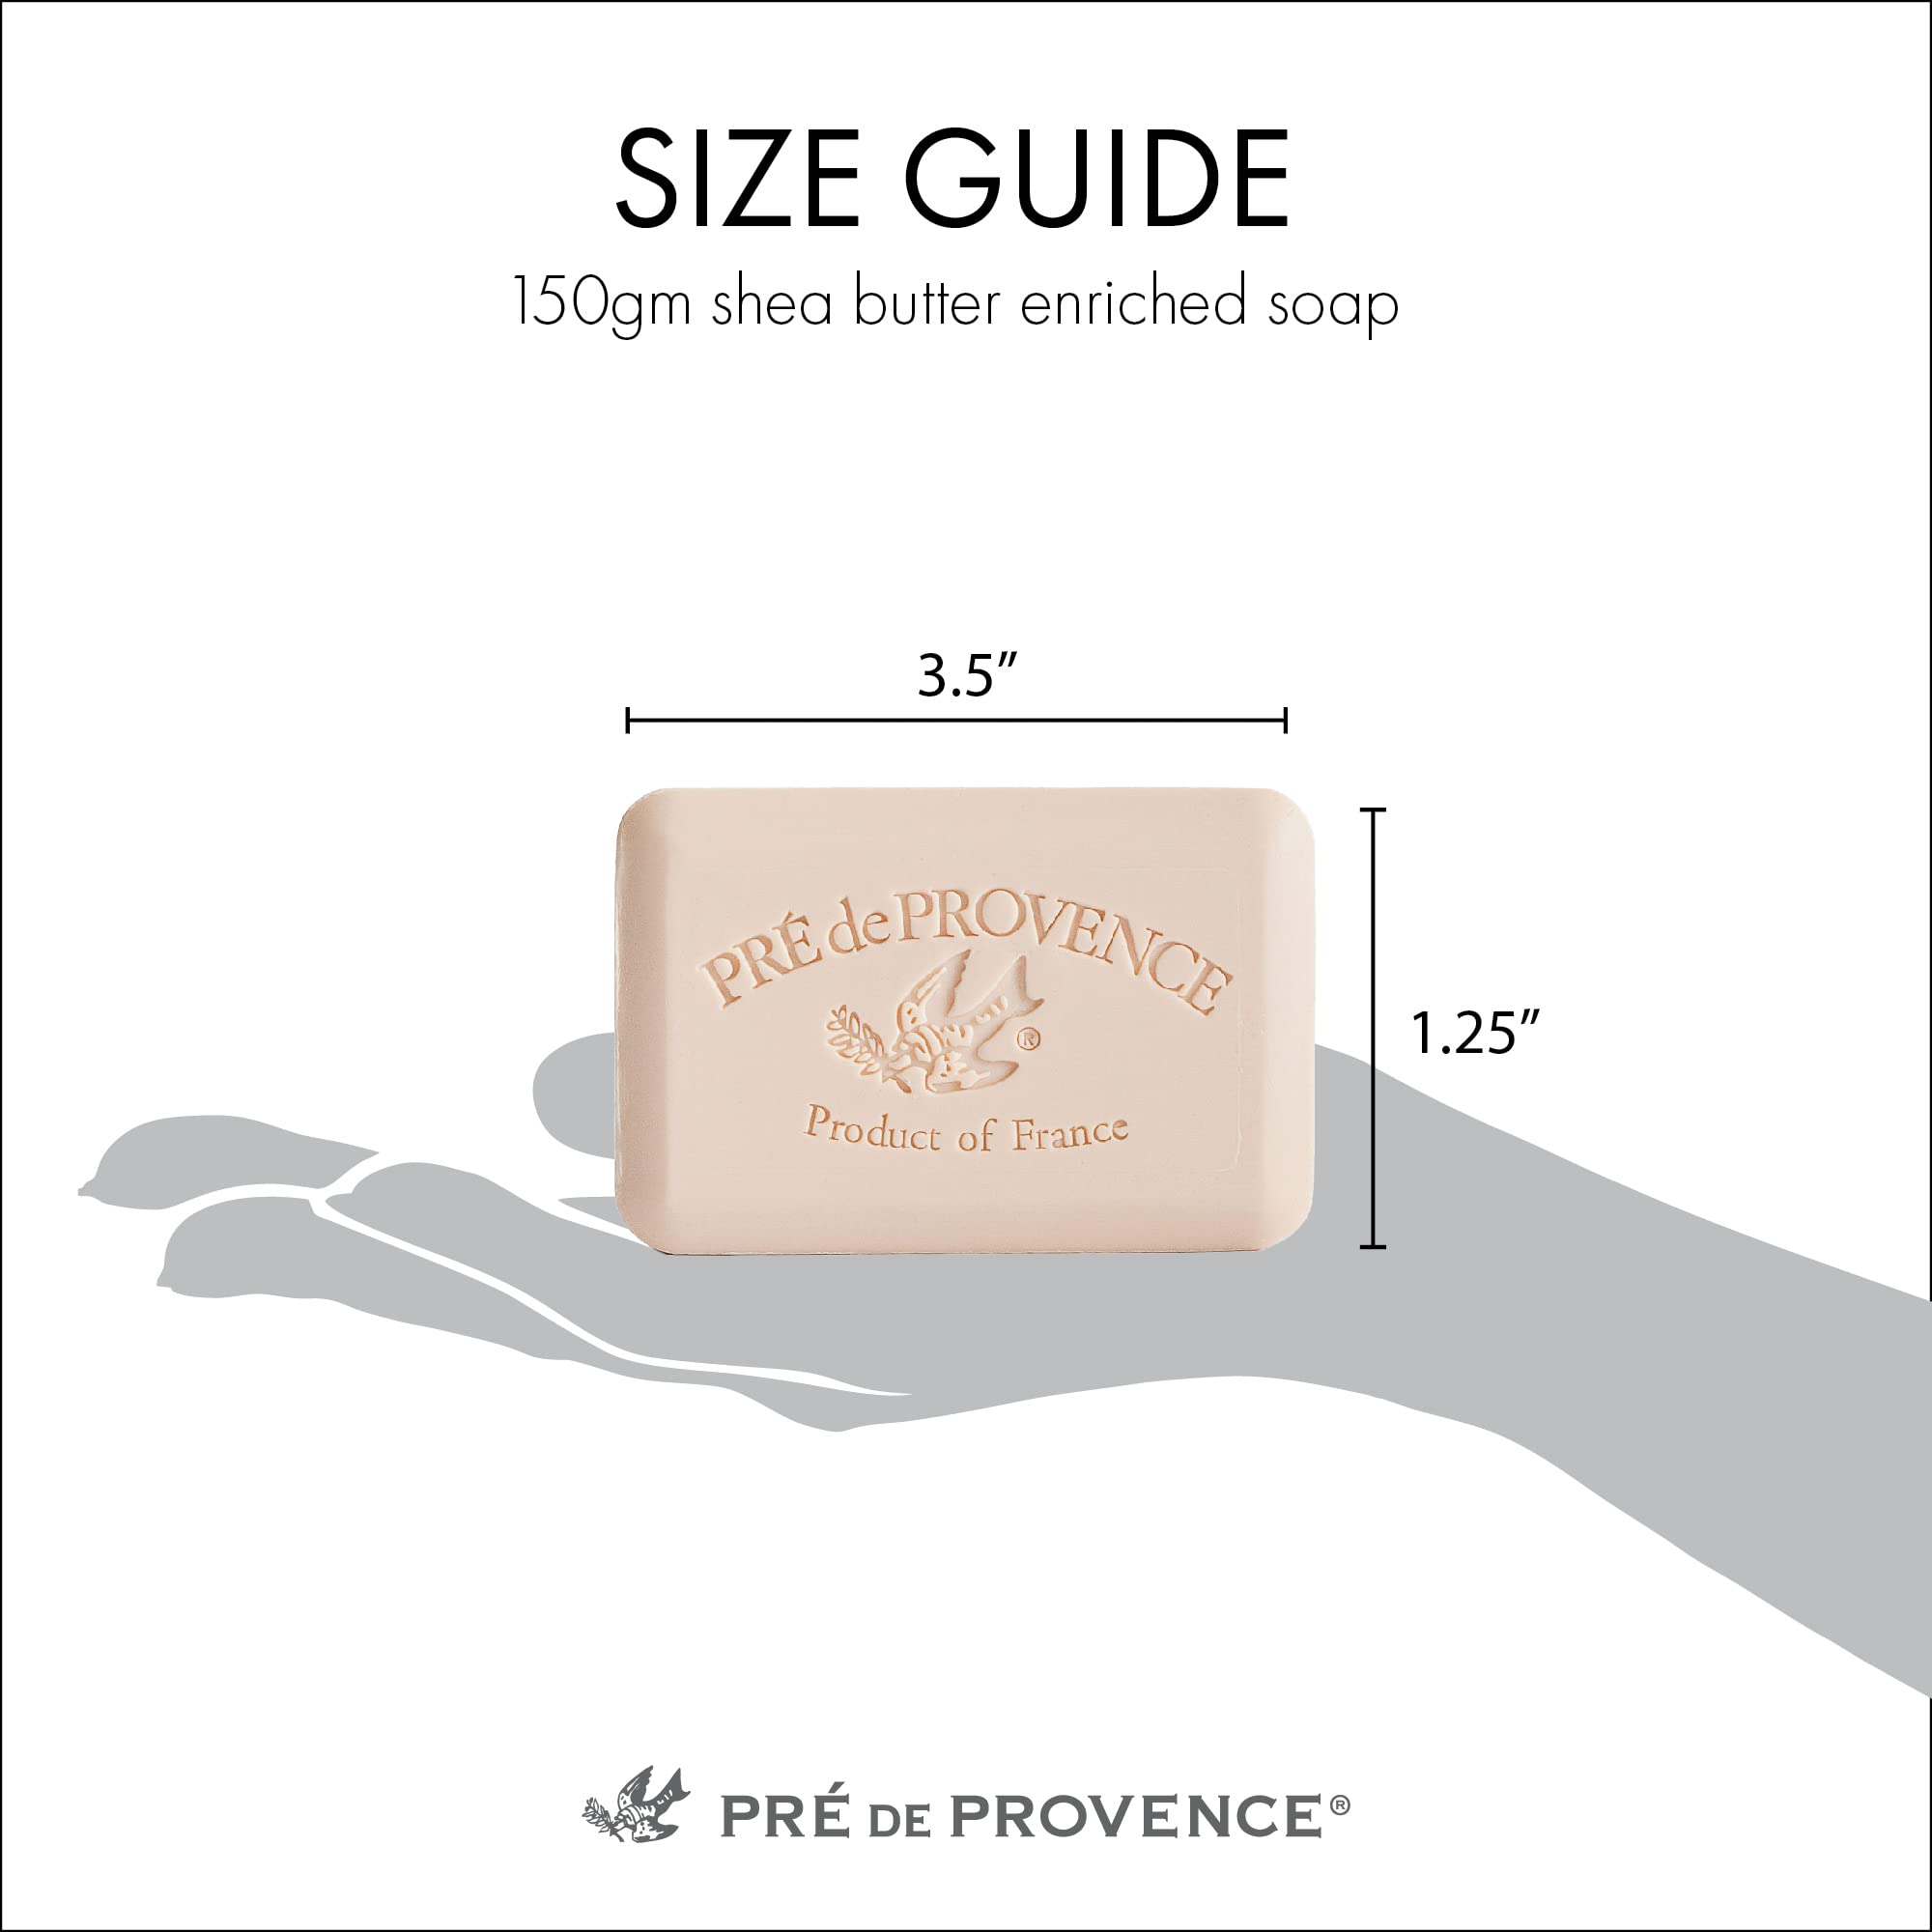 Pre de Provence Artisanal French Moisturizing Soap Bar, Shea Butter Enriched, Quad Milled for Long Lasting Rich Smooth Lather, 5.3 Ounce, Honey Almond